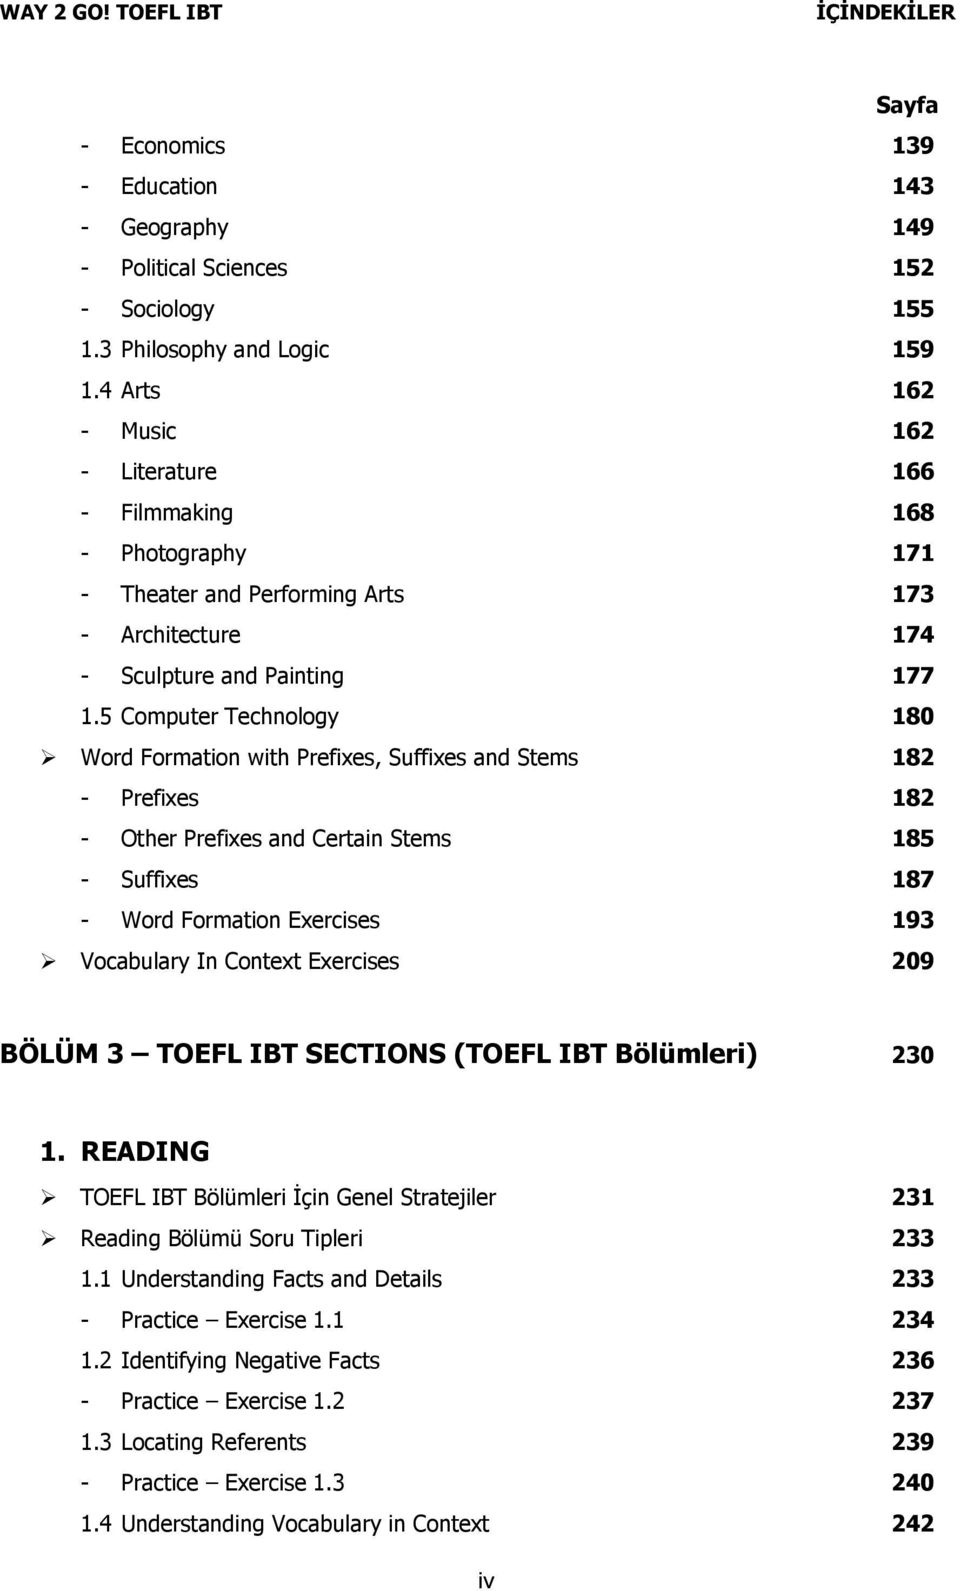 5 Computer Technology 180 Word Formation with Prefixes, Suffixes and Stems 182 - Prefixes 182 - Other Prefixes and Certain Stems 185 - Suffixes 187 - Word Formation Exercises 193 Vocabulary In